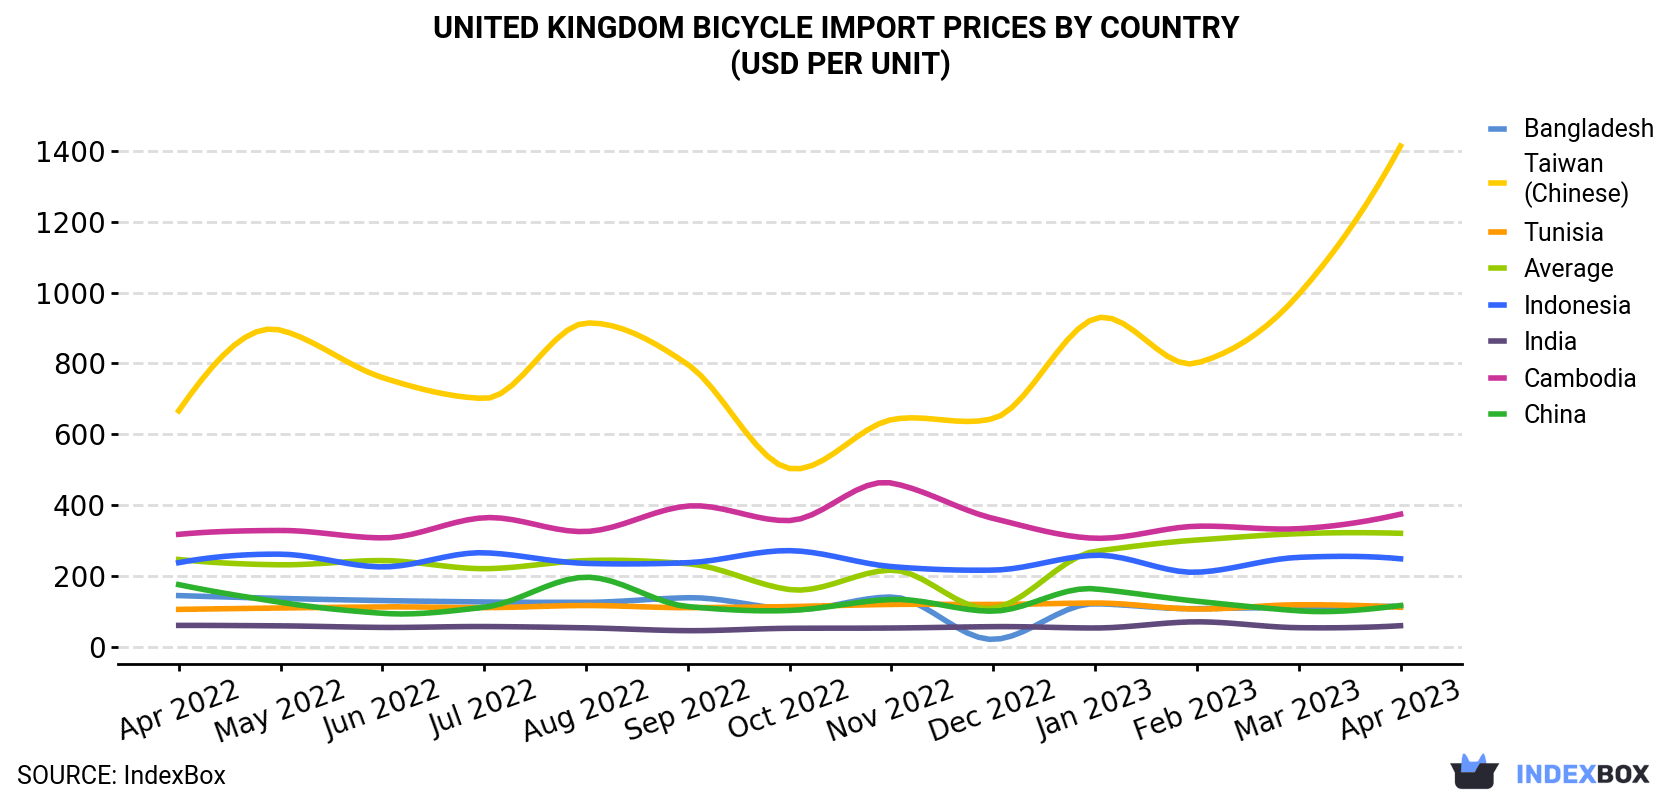 United Kingdom Bicycle Import Prices By Country (USD Per Unit)